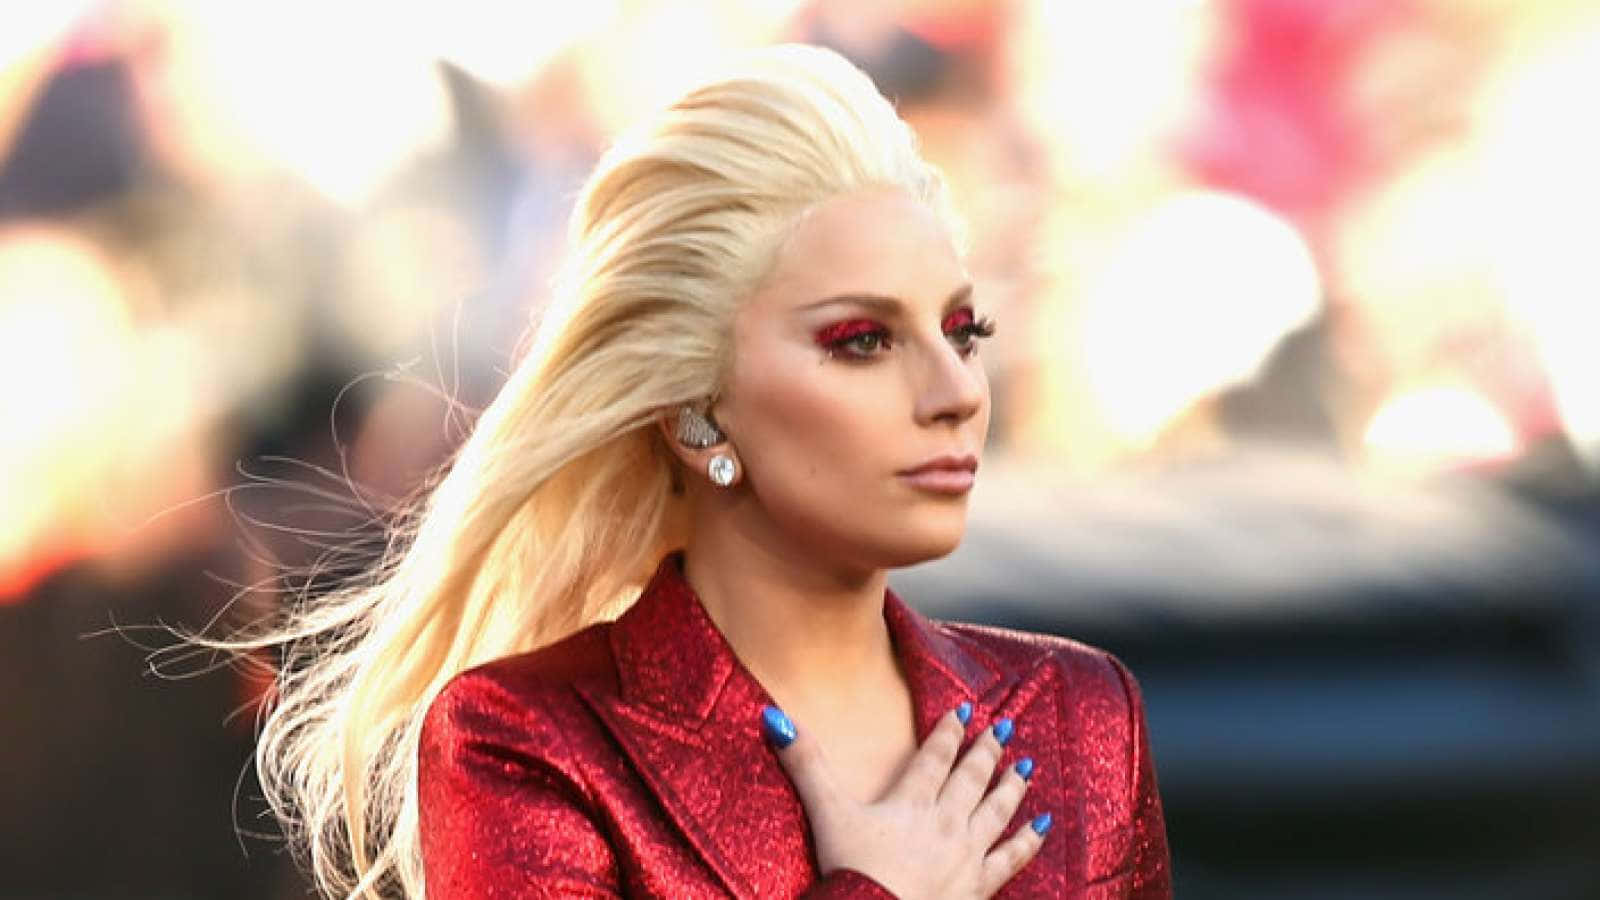 World-renowned singer Lady Gaga belts out a tune